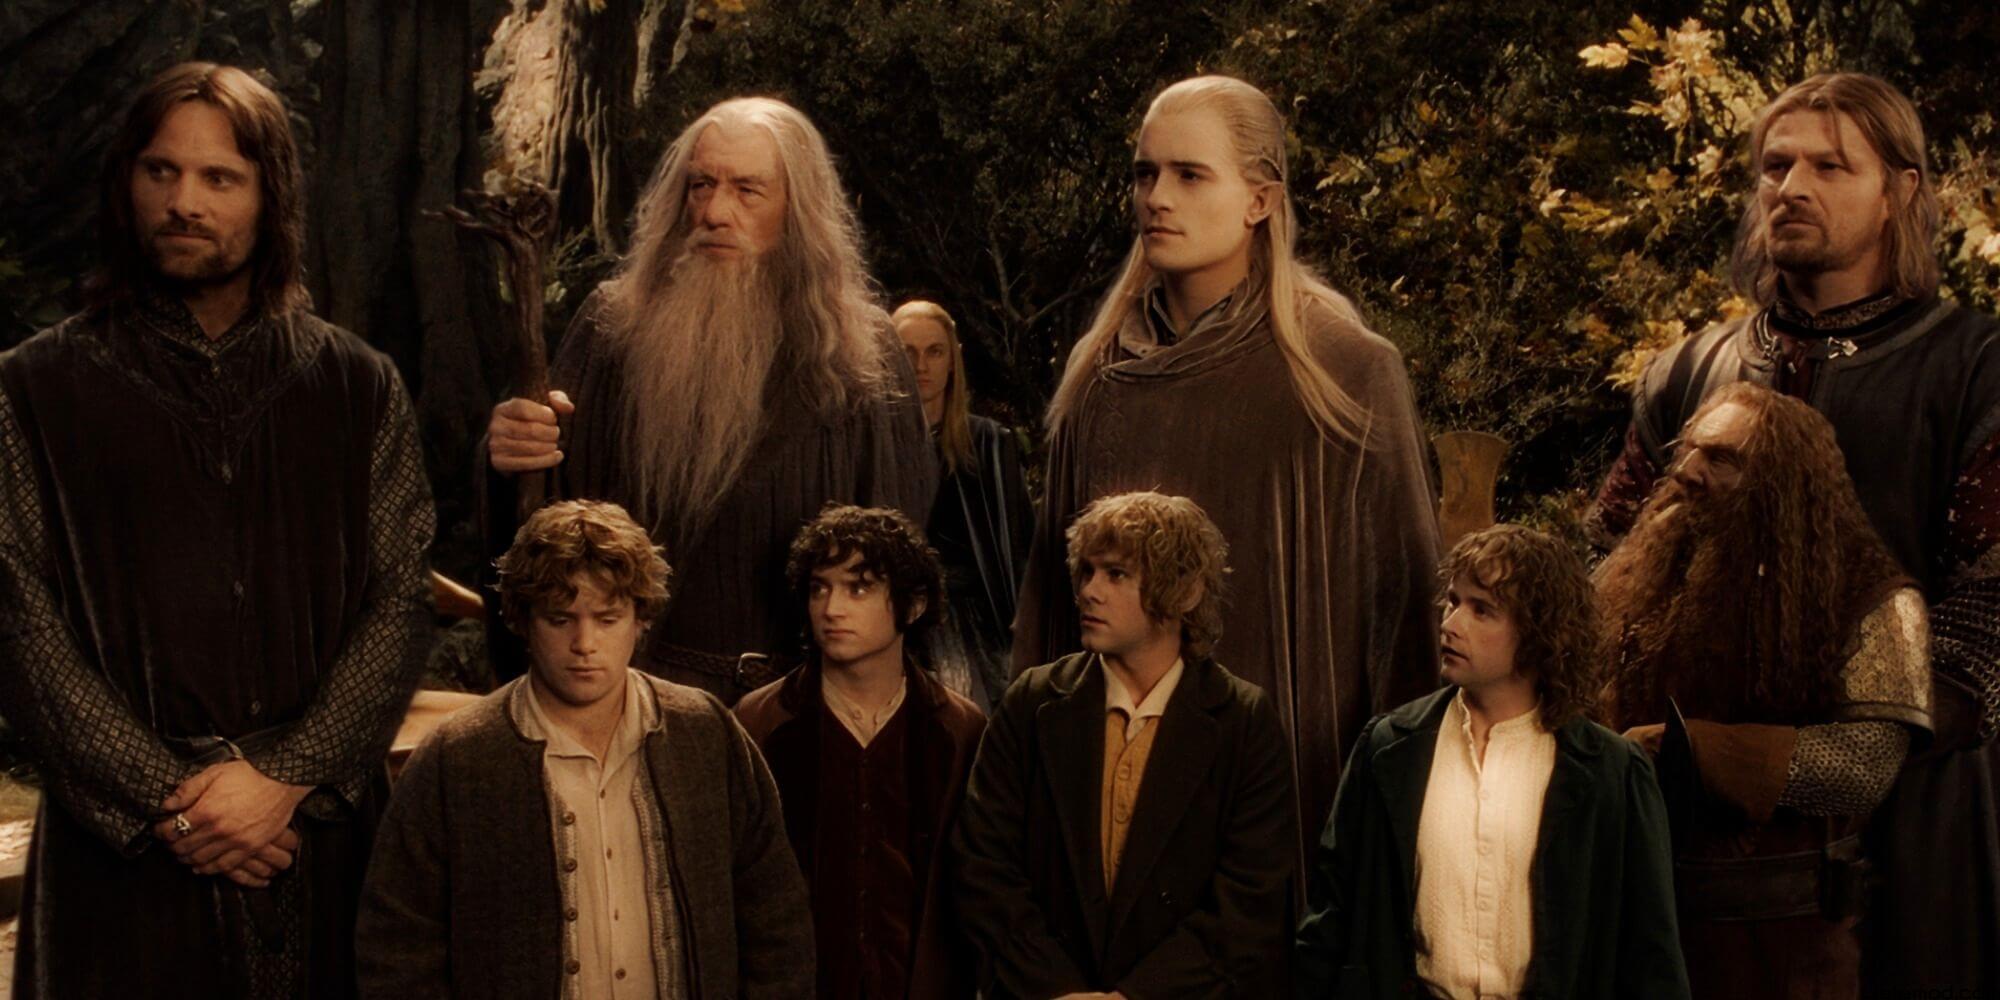 The Lord of the Rings - The Fellowship of the Ring (2001)